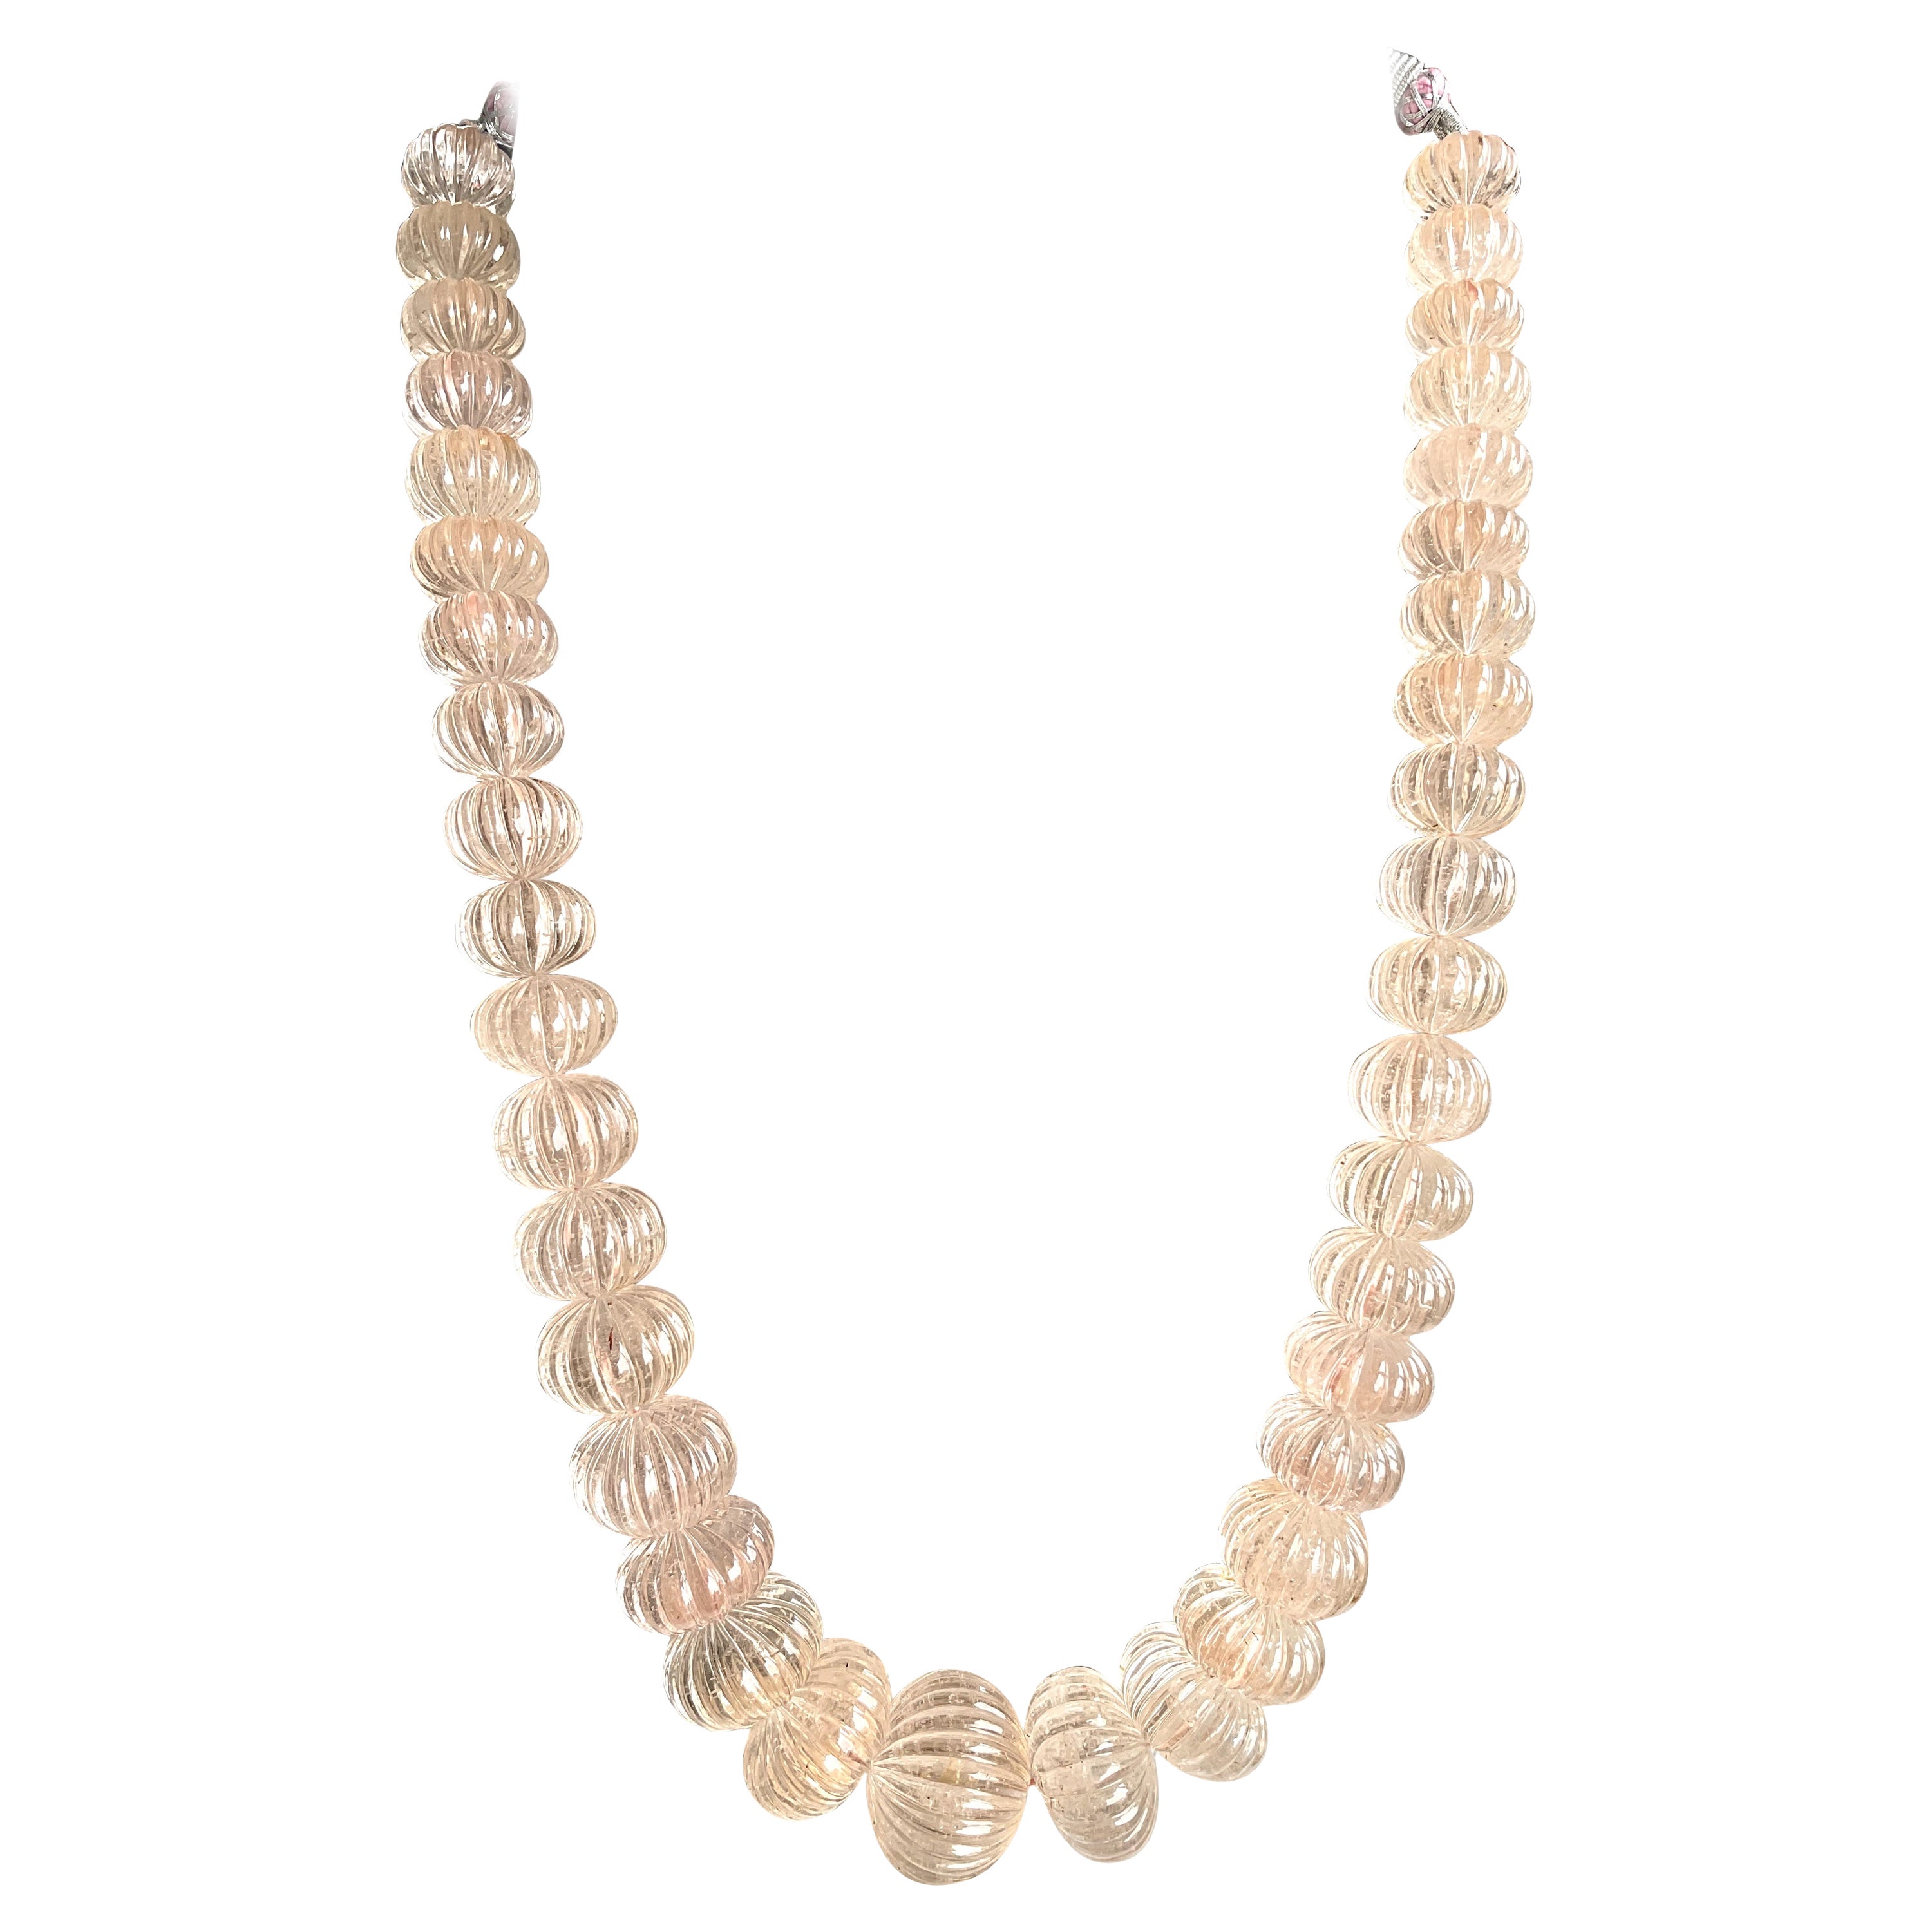 1395.25 carats Morganite fluted melon Beads Necklace Top Quality Natural Gems